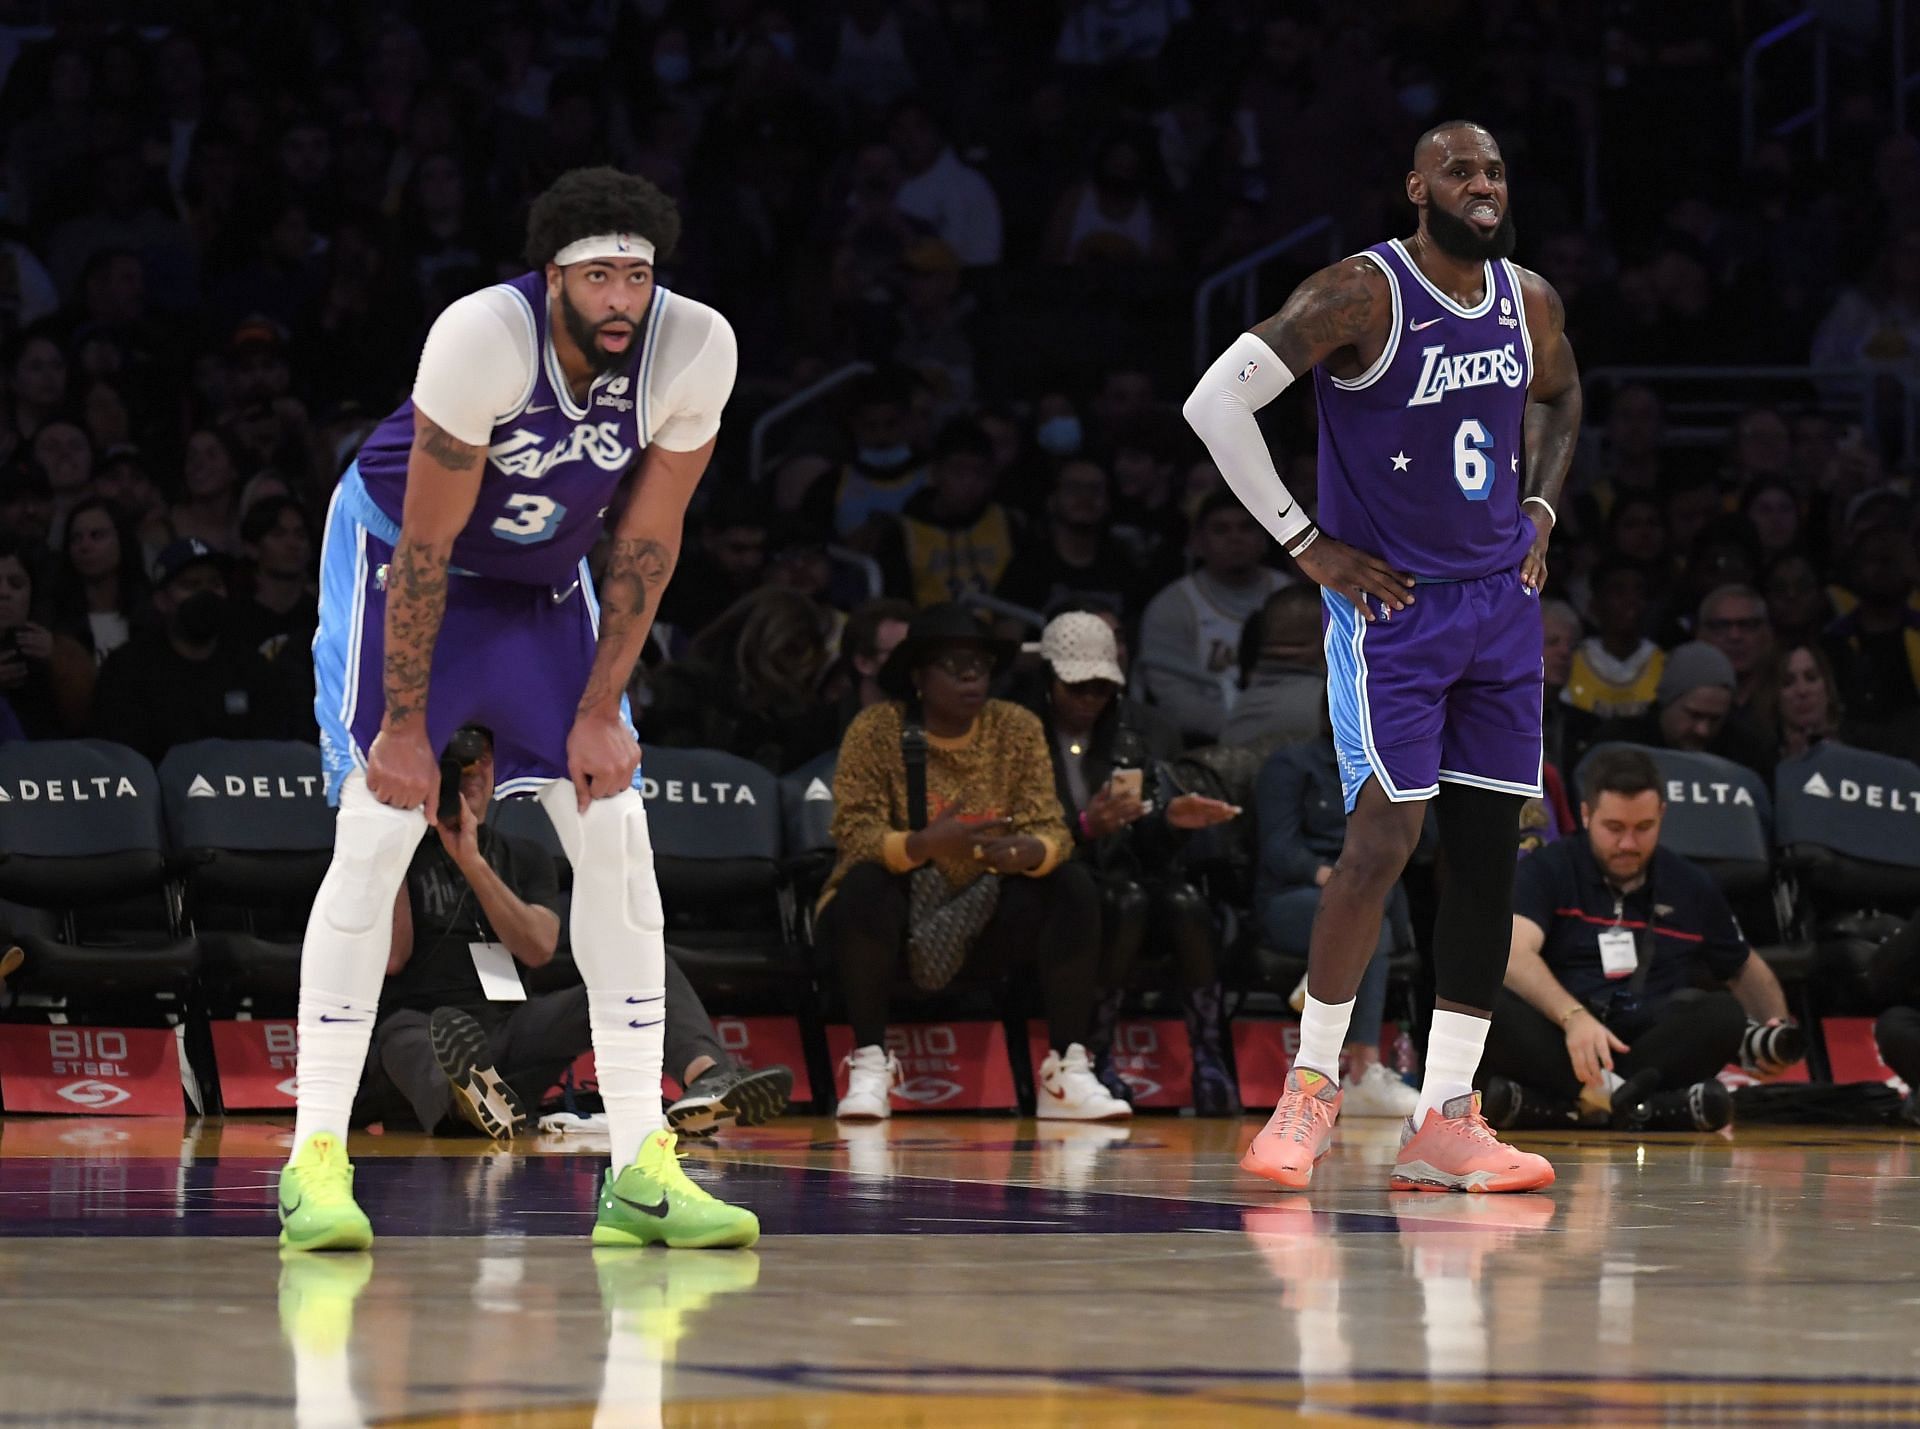 LeBron James and Anthony Davis of the Lakers